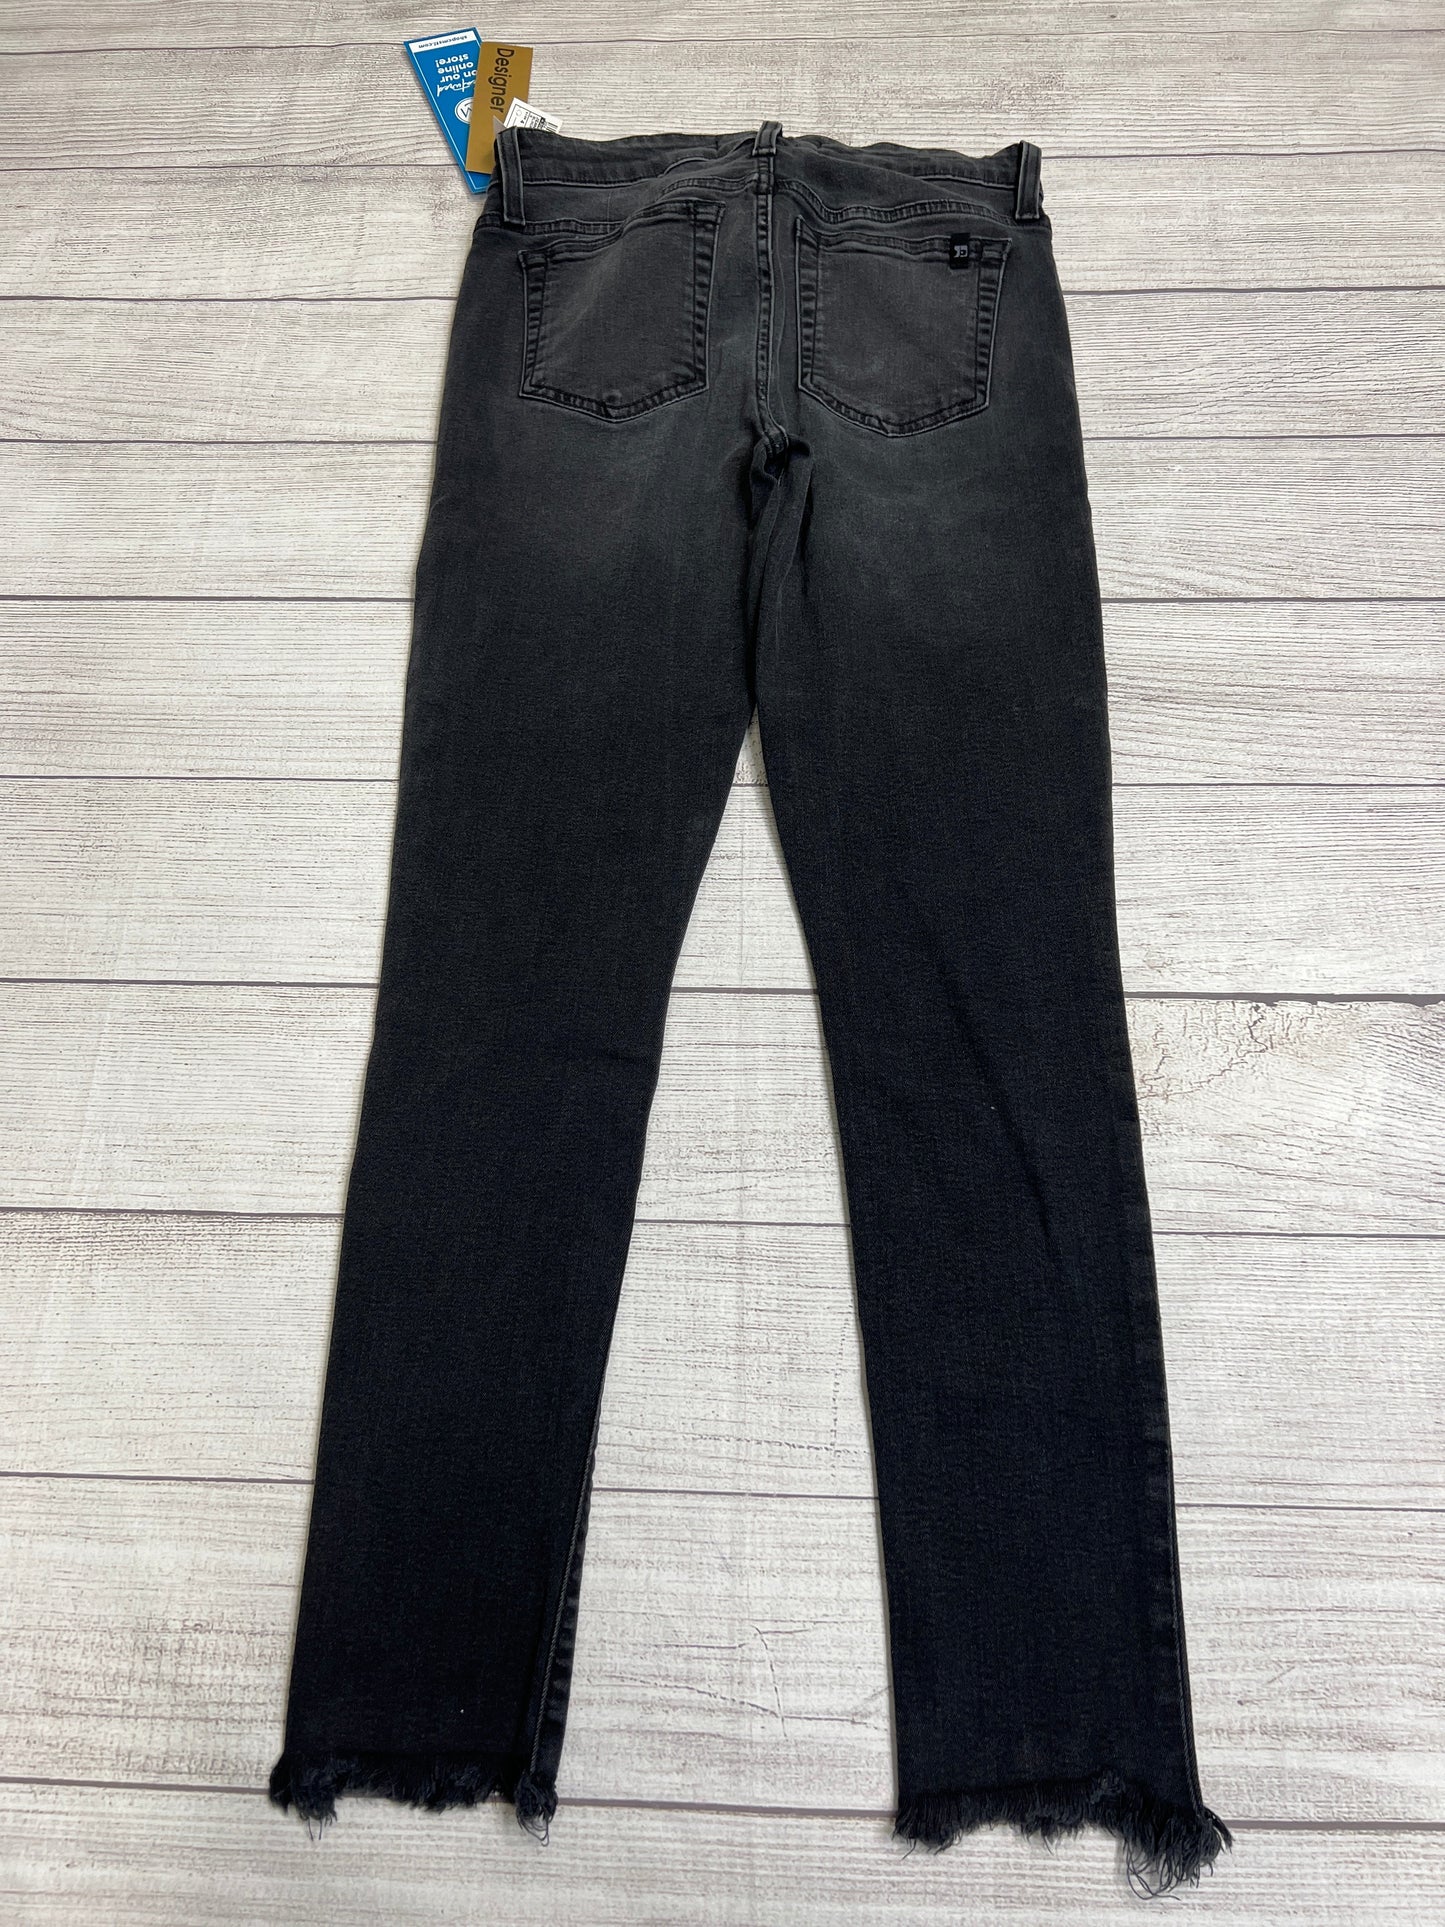 Jeans Designer By Joes Jeans  Size: 4/27